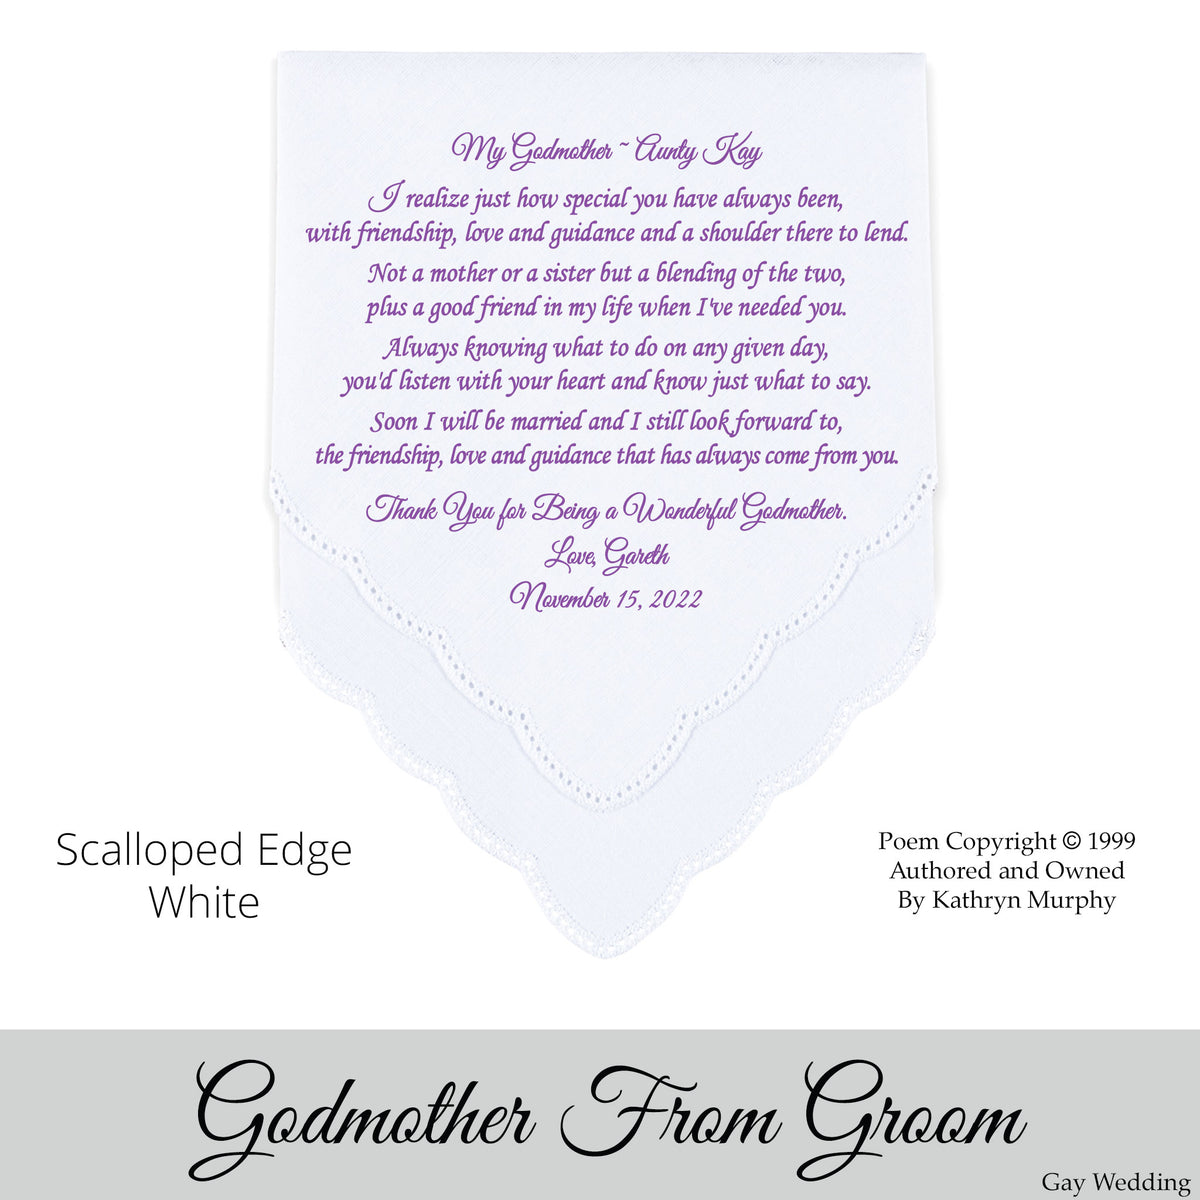 Gay Wedding Gift for the Godmother of the Groom poem printed wedding hankie